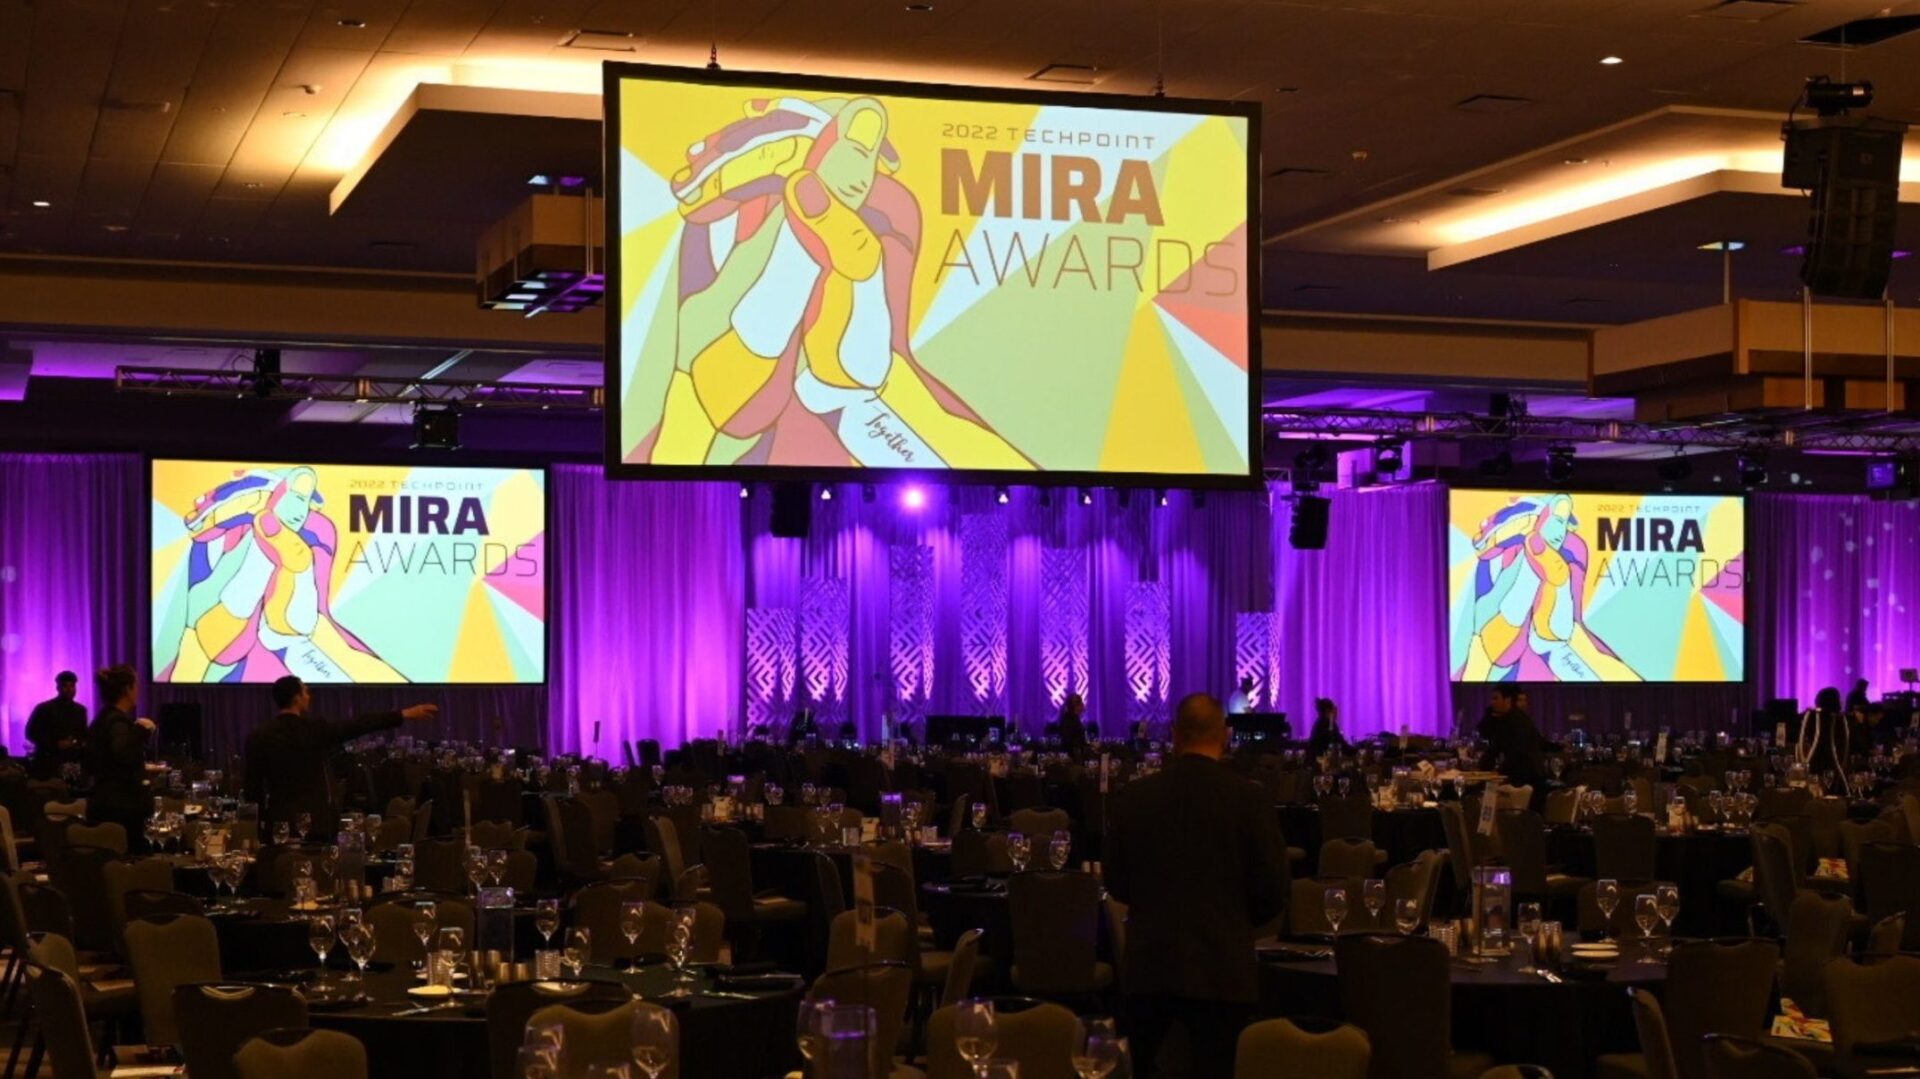 The Mira Awards highlights the best of Indiana's Tech Companies.